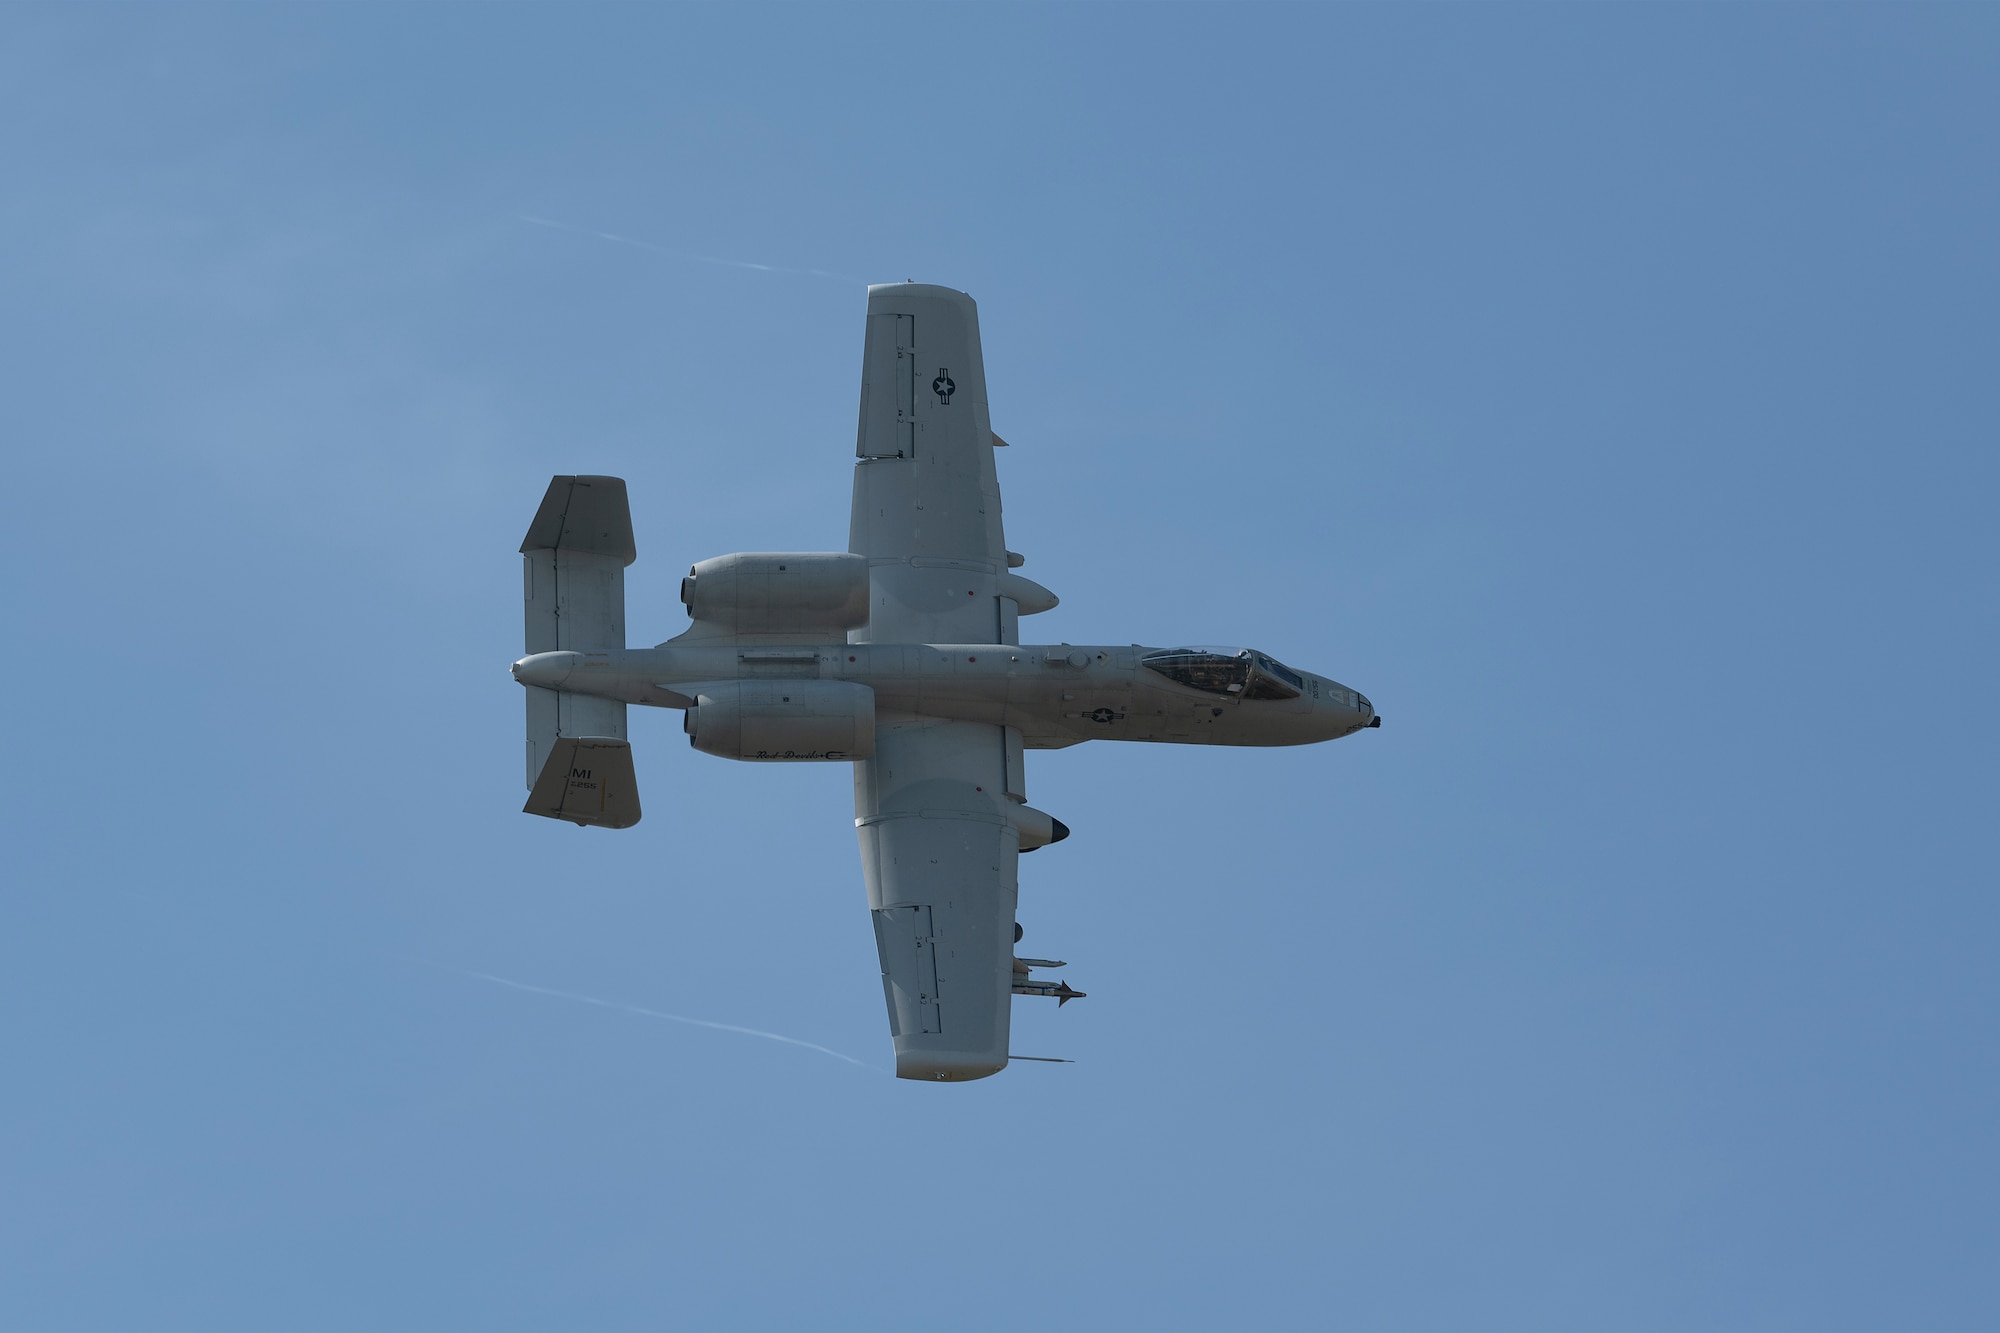 A U.S. Air Force A-10 Thunderbolt II aircraft strafes over opposing forces as part of agile combat employment during the Agile Rage exercise, Avon Park, Florida, Feb. 28, 2024. Agile Rage 2024 is a National Guard Bureau (NGB)/A3 led military exercise, hosted at the Air Dominance Center, taking place from February 26 to March 8, 2024 that involves the collaborative efforts of various Air National Guard Wings conducting joint counter-land and combat search and rescue (CSAR) operations in a simulated medium to high threat environment. (U.S. Air National Guard photo by Master Sgt. Rafael D. Rosa)